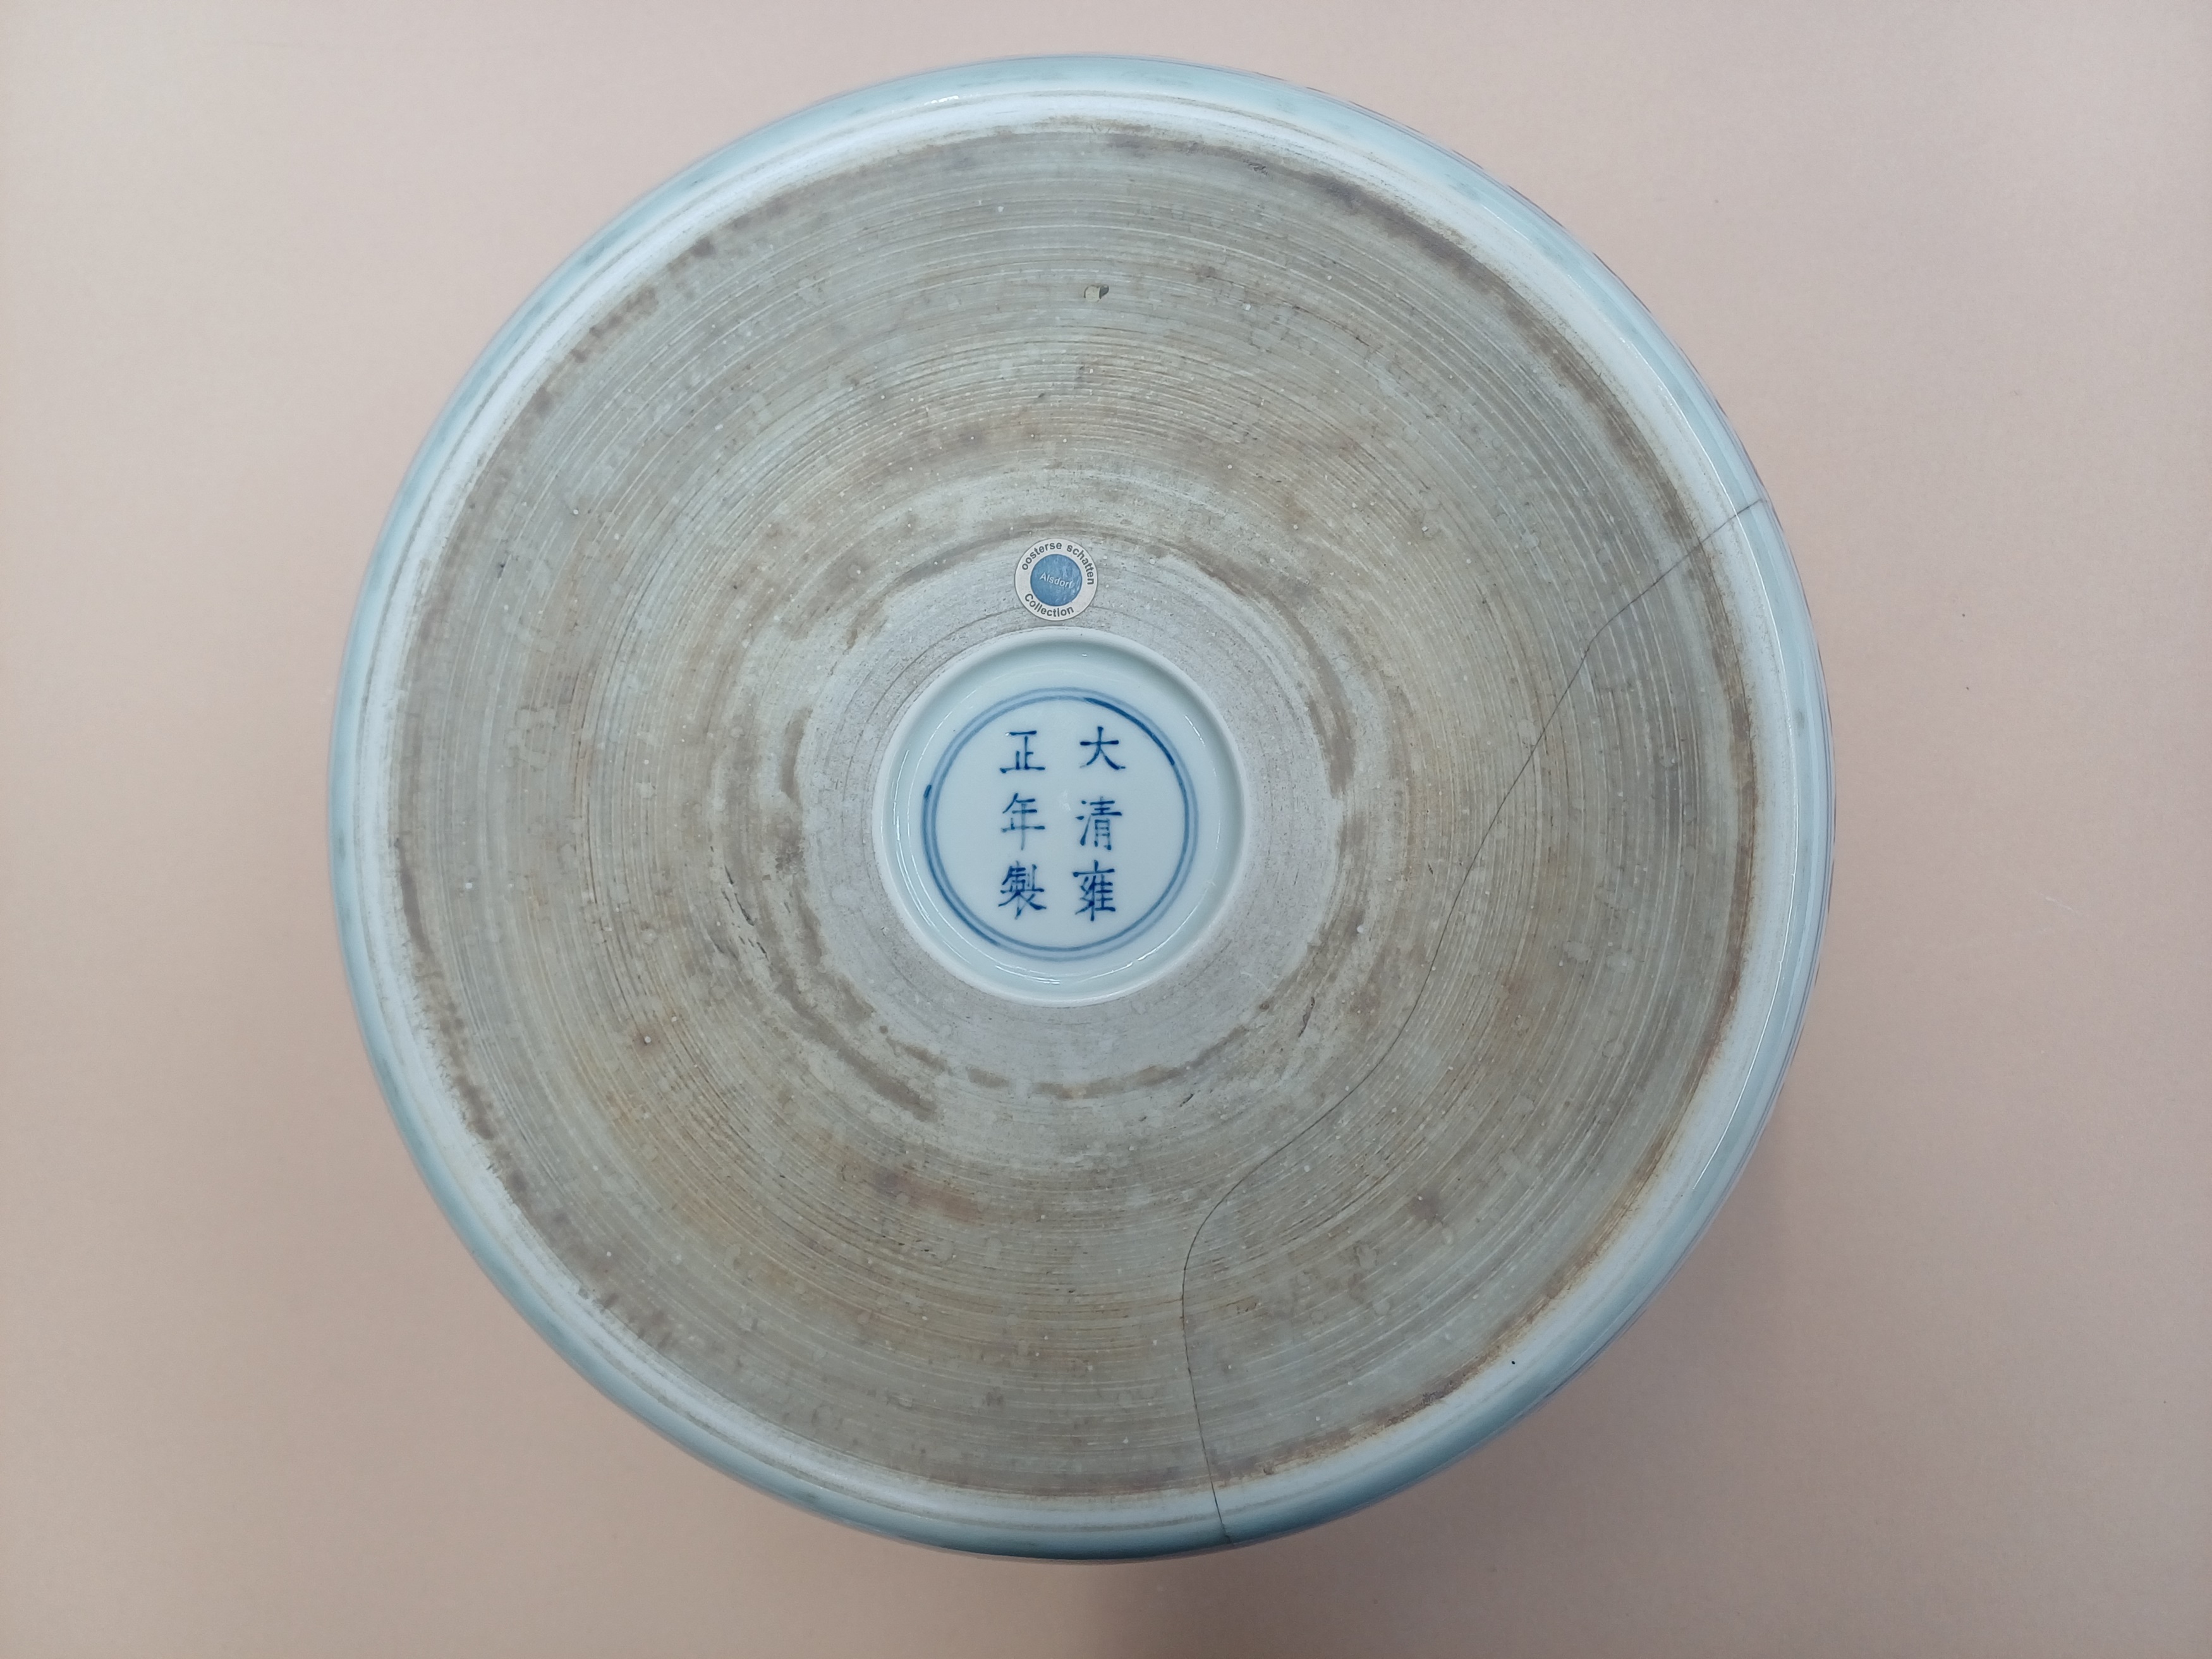 A CHINESE MING-STYLE BLUE AND WHITE 'LOTUS' BASIN 明式青花纏枝蓮紋盆 《大清雍正年製》款 - Image 14 of 14